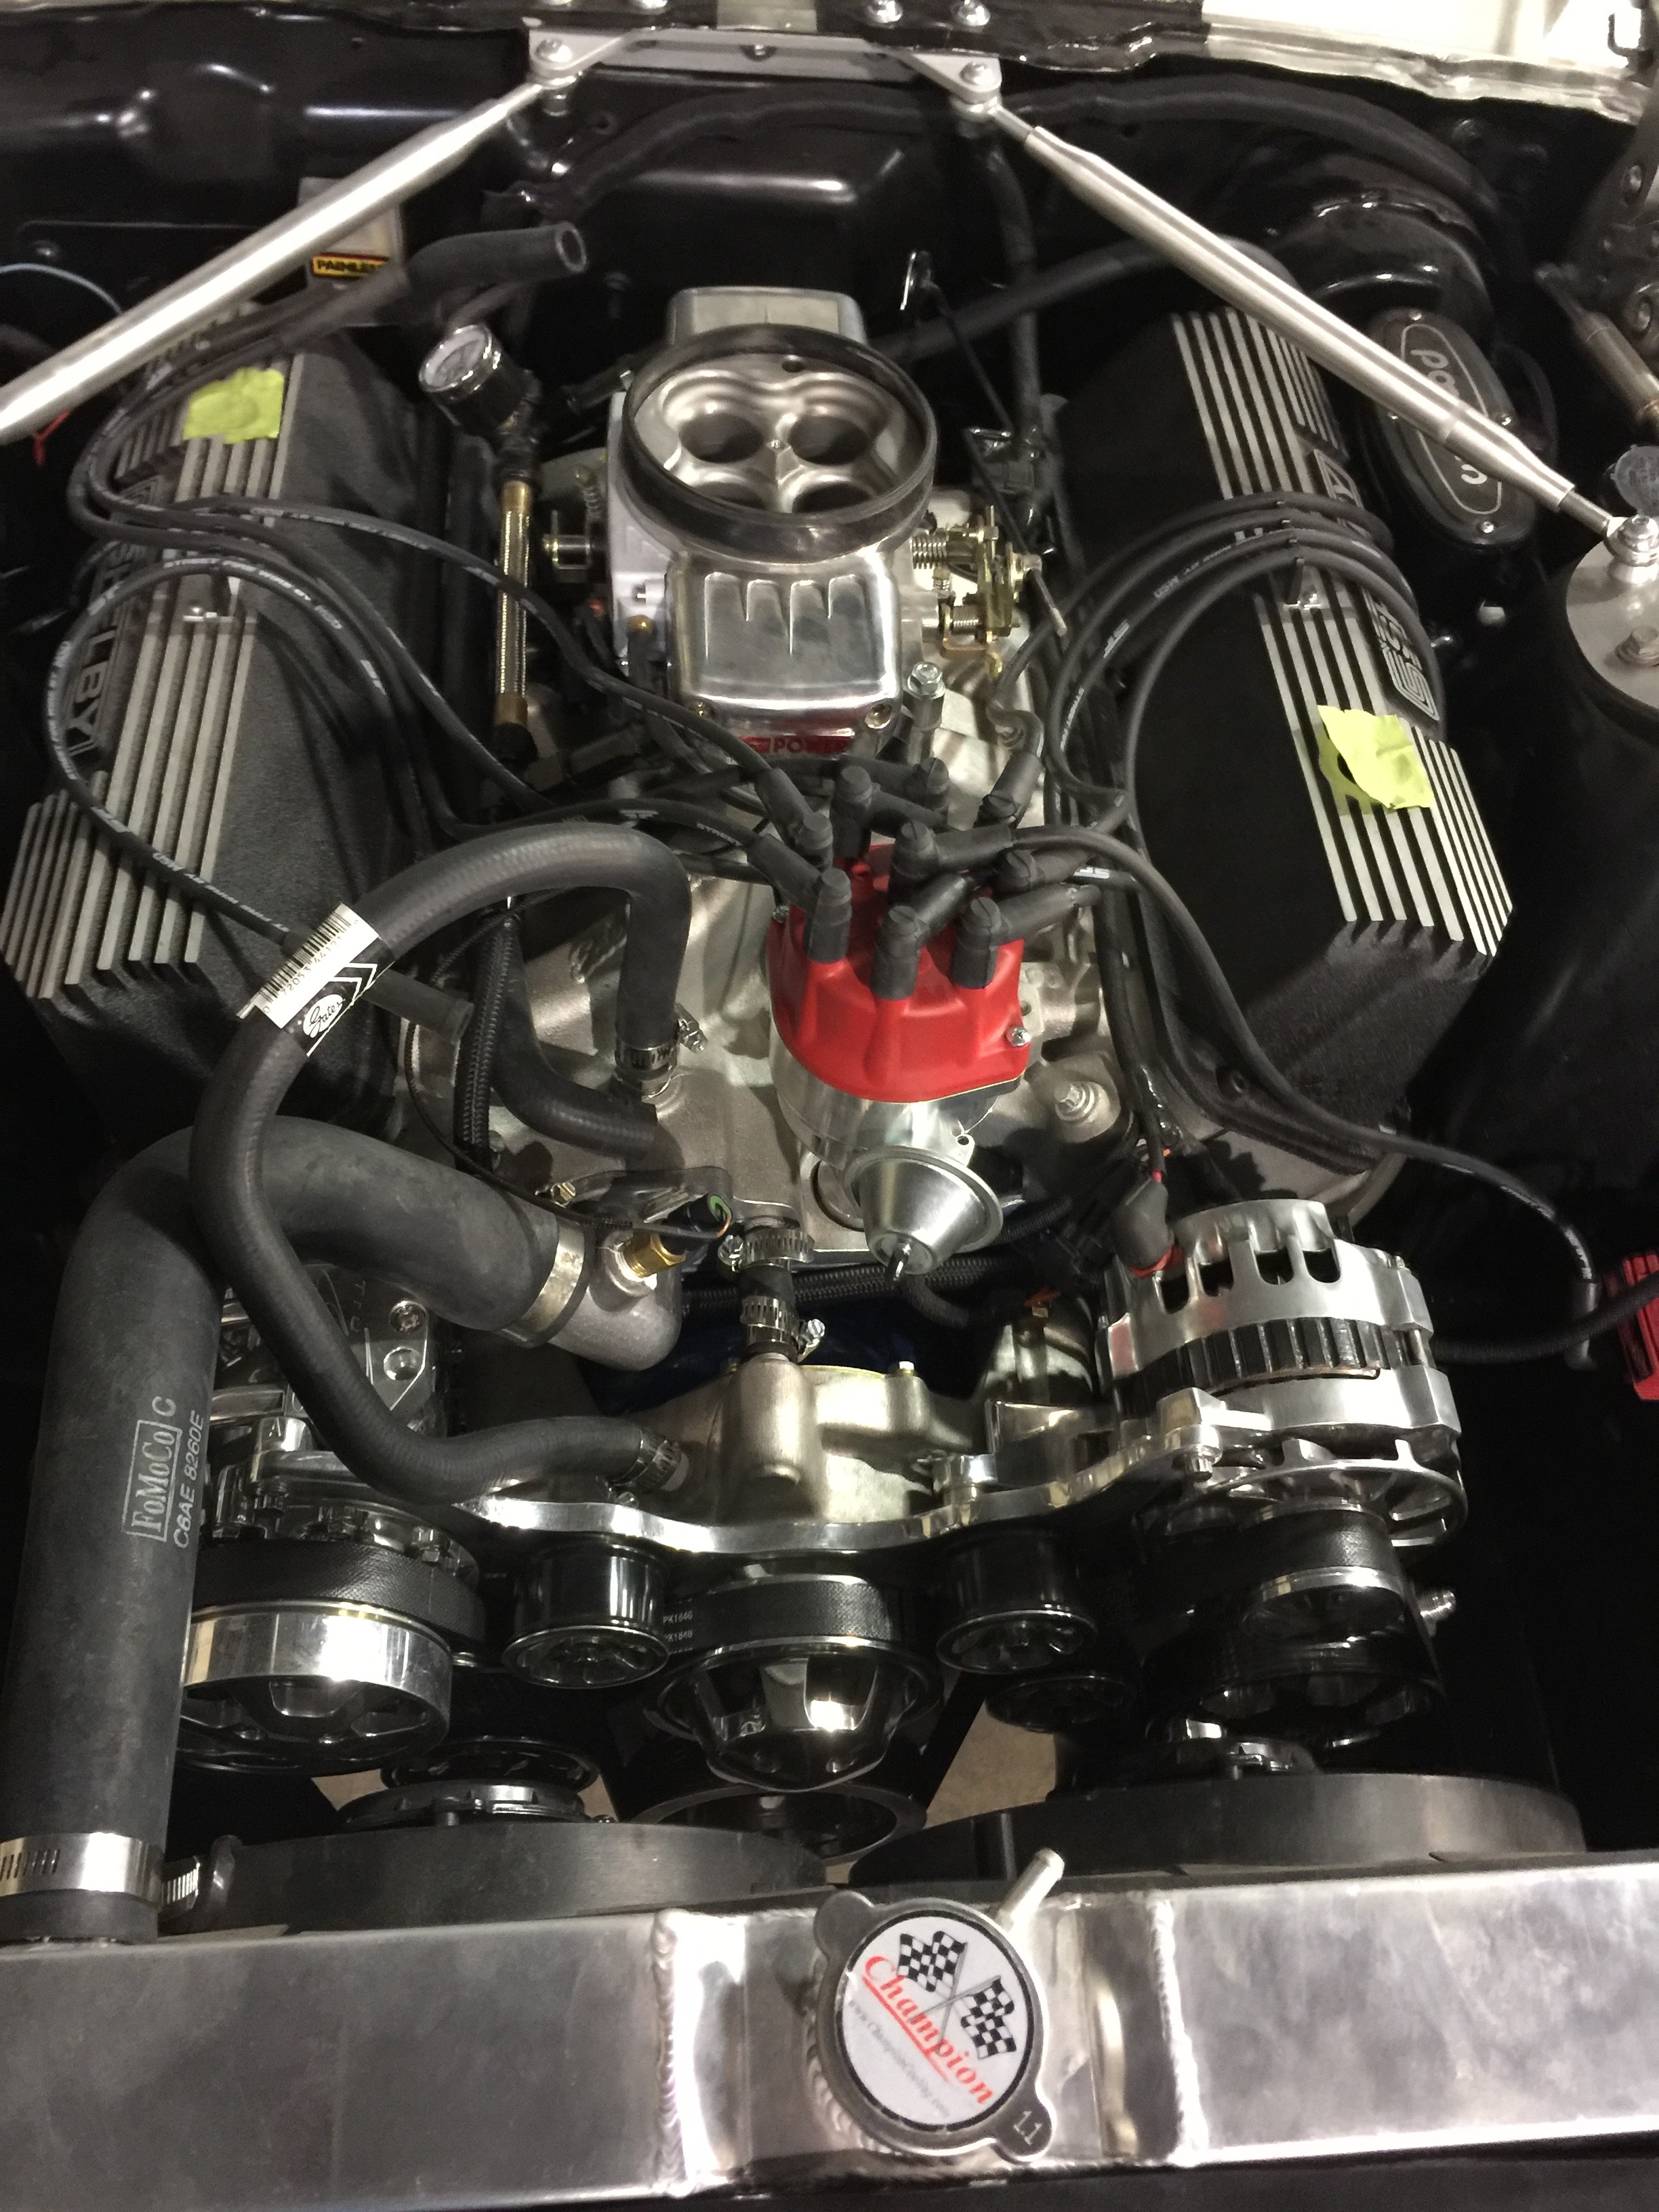 1967 Ford Mustang ELEANOR 500 HP ~ For Sale - Prestige ...